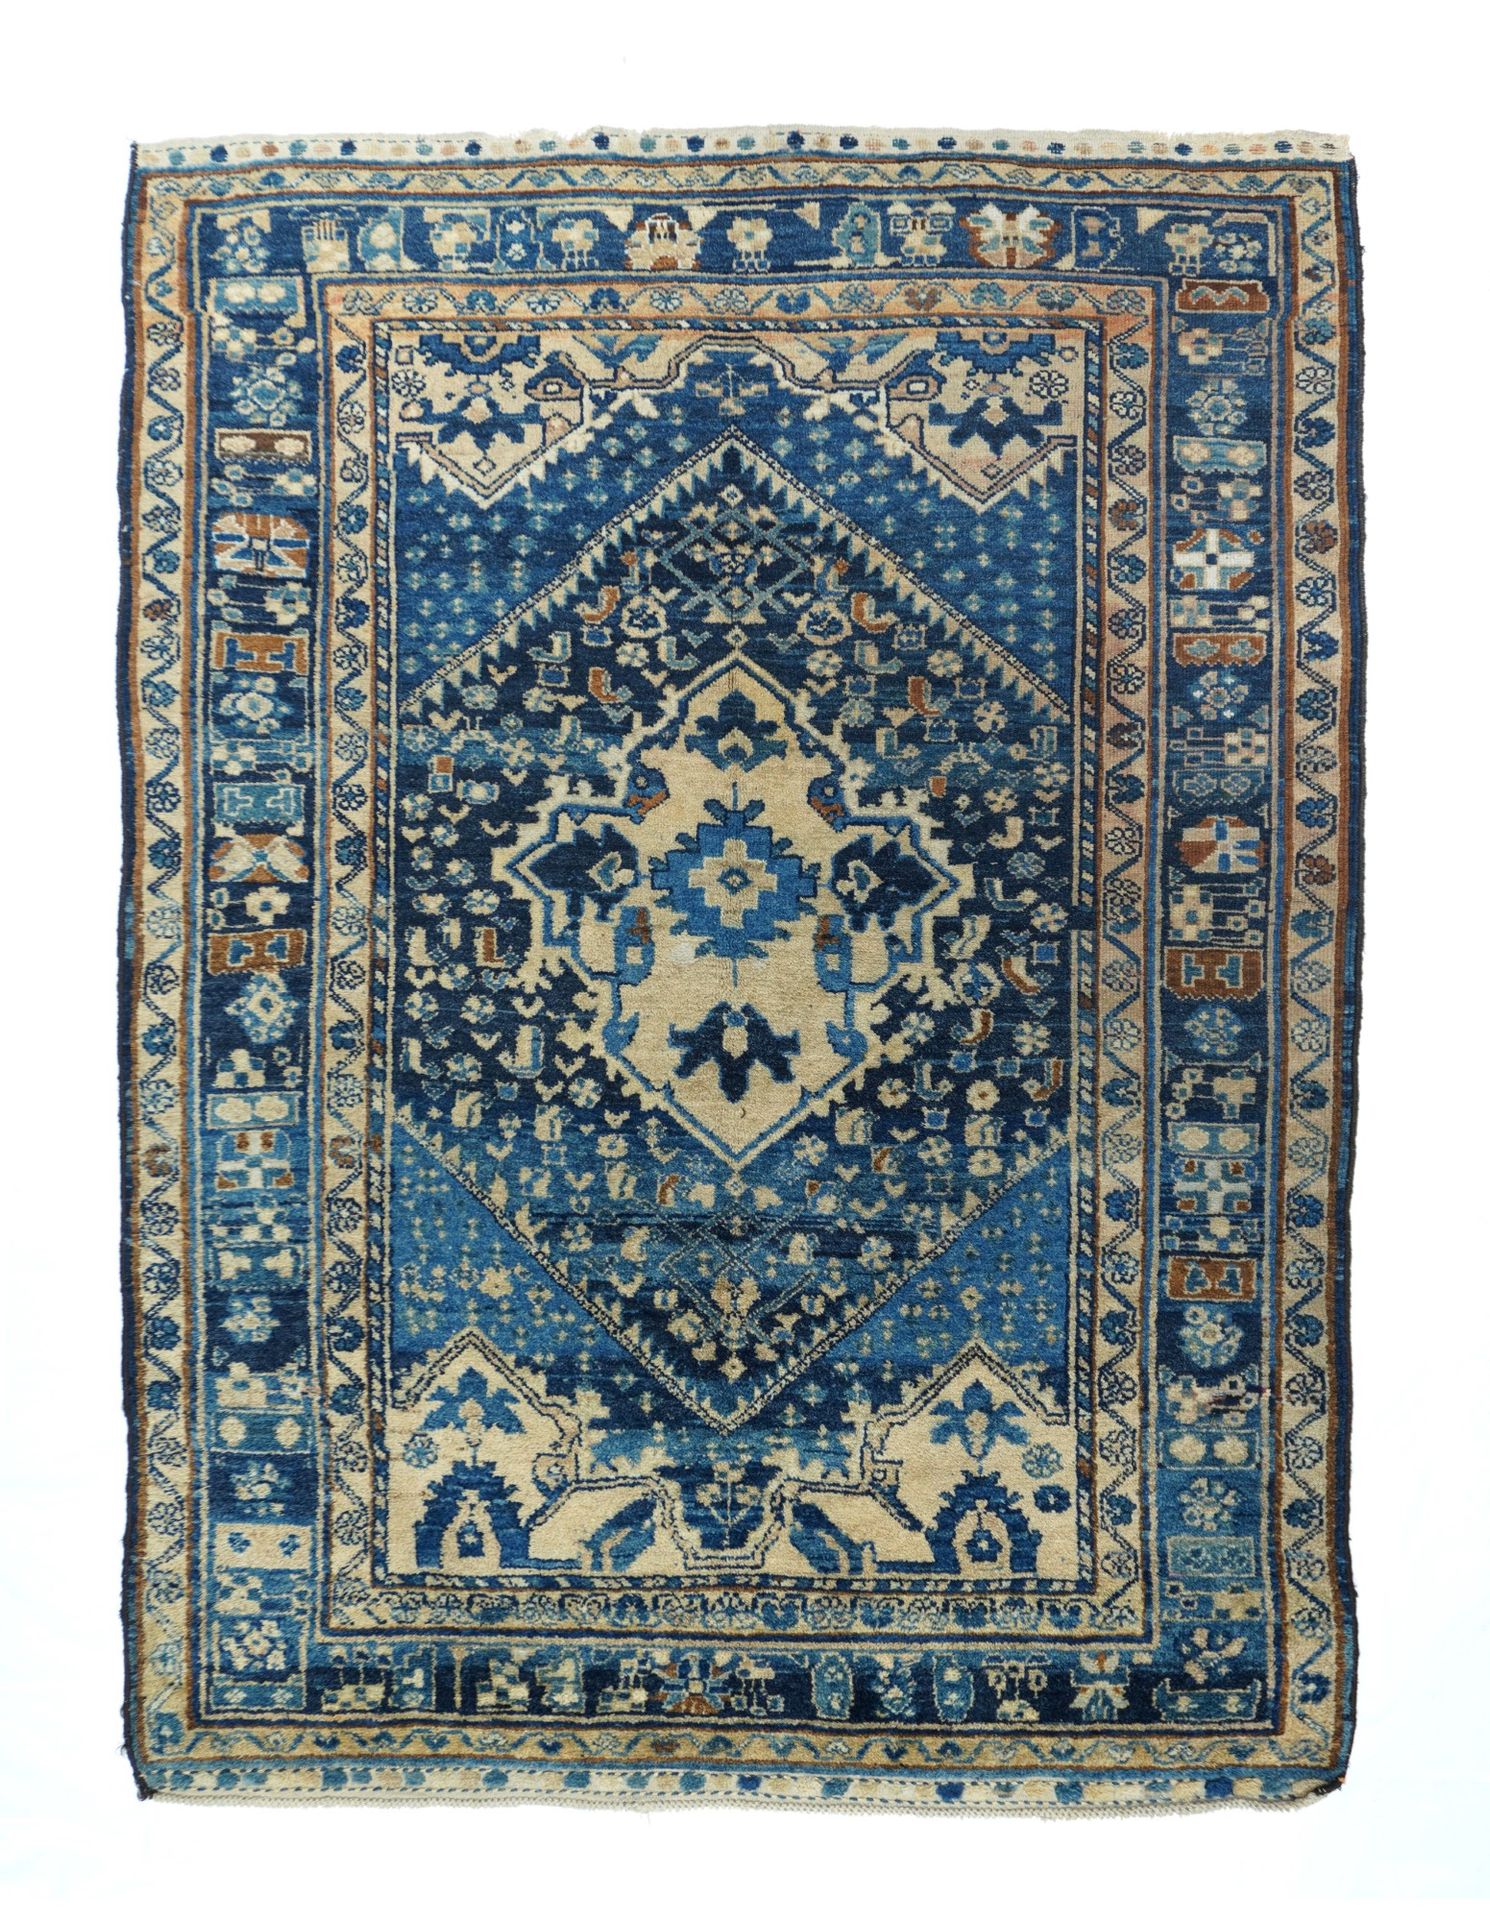 Null Antique Malayer Rug, 5'4'' x 7'6'' ( 1.63 x 2.29 M )